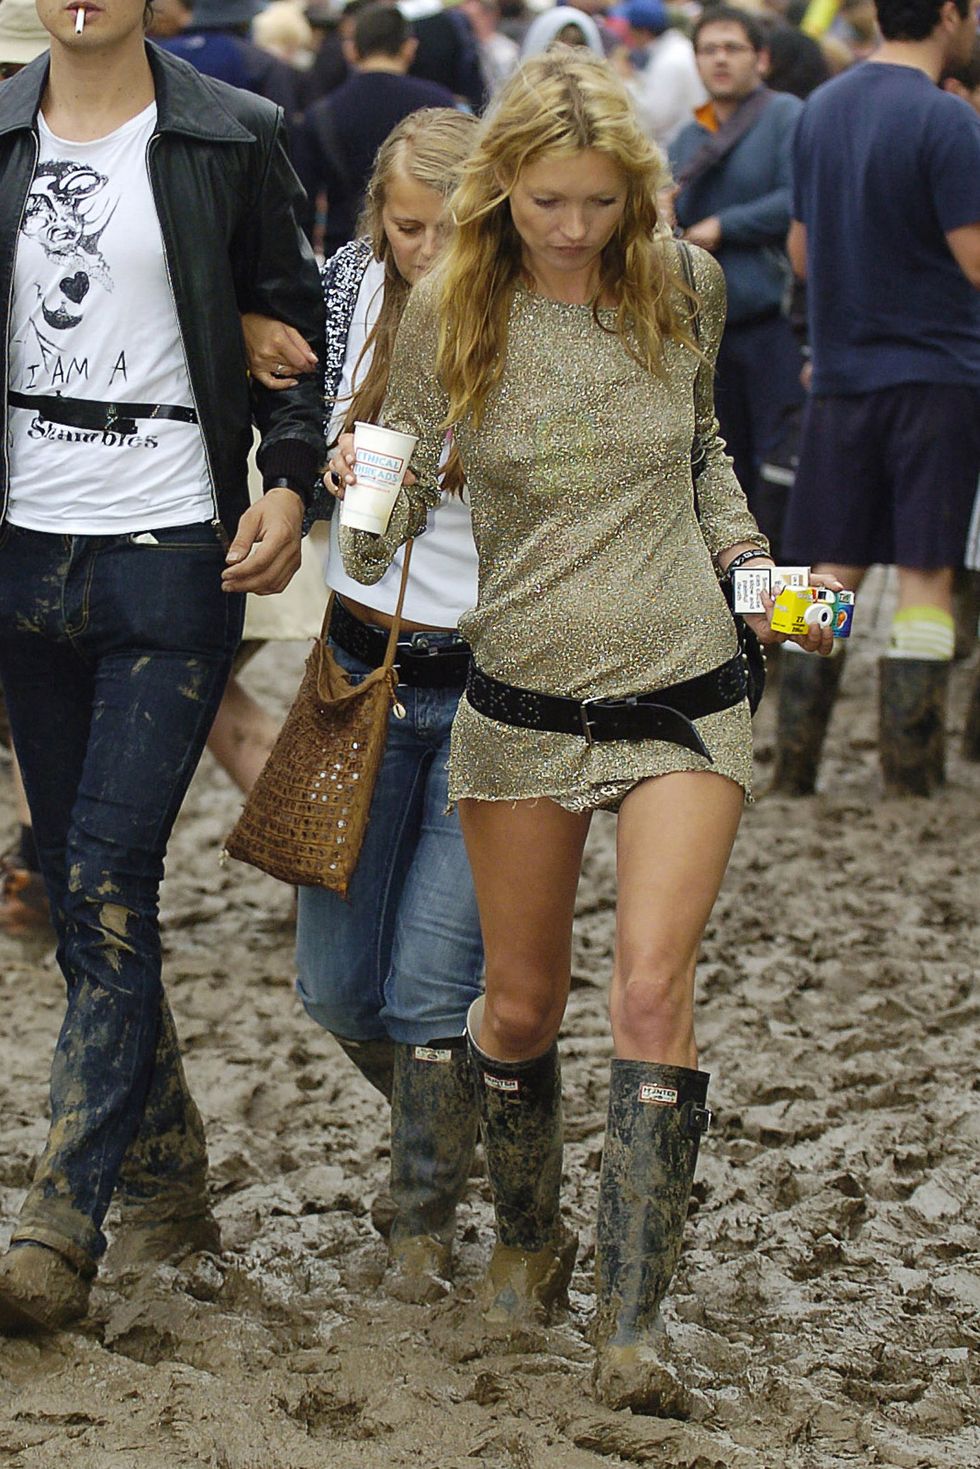 The best Glastonbury fashion of all time